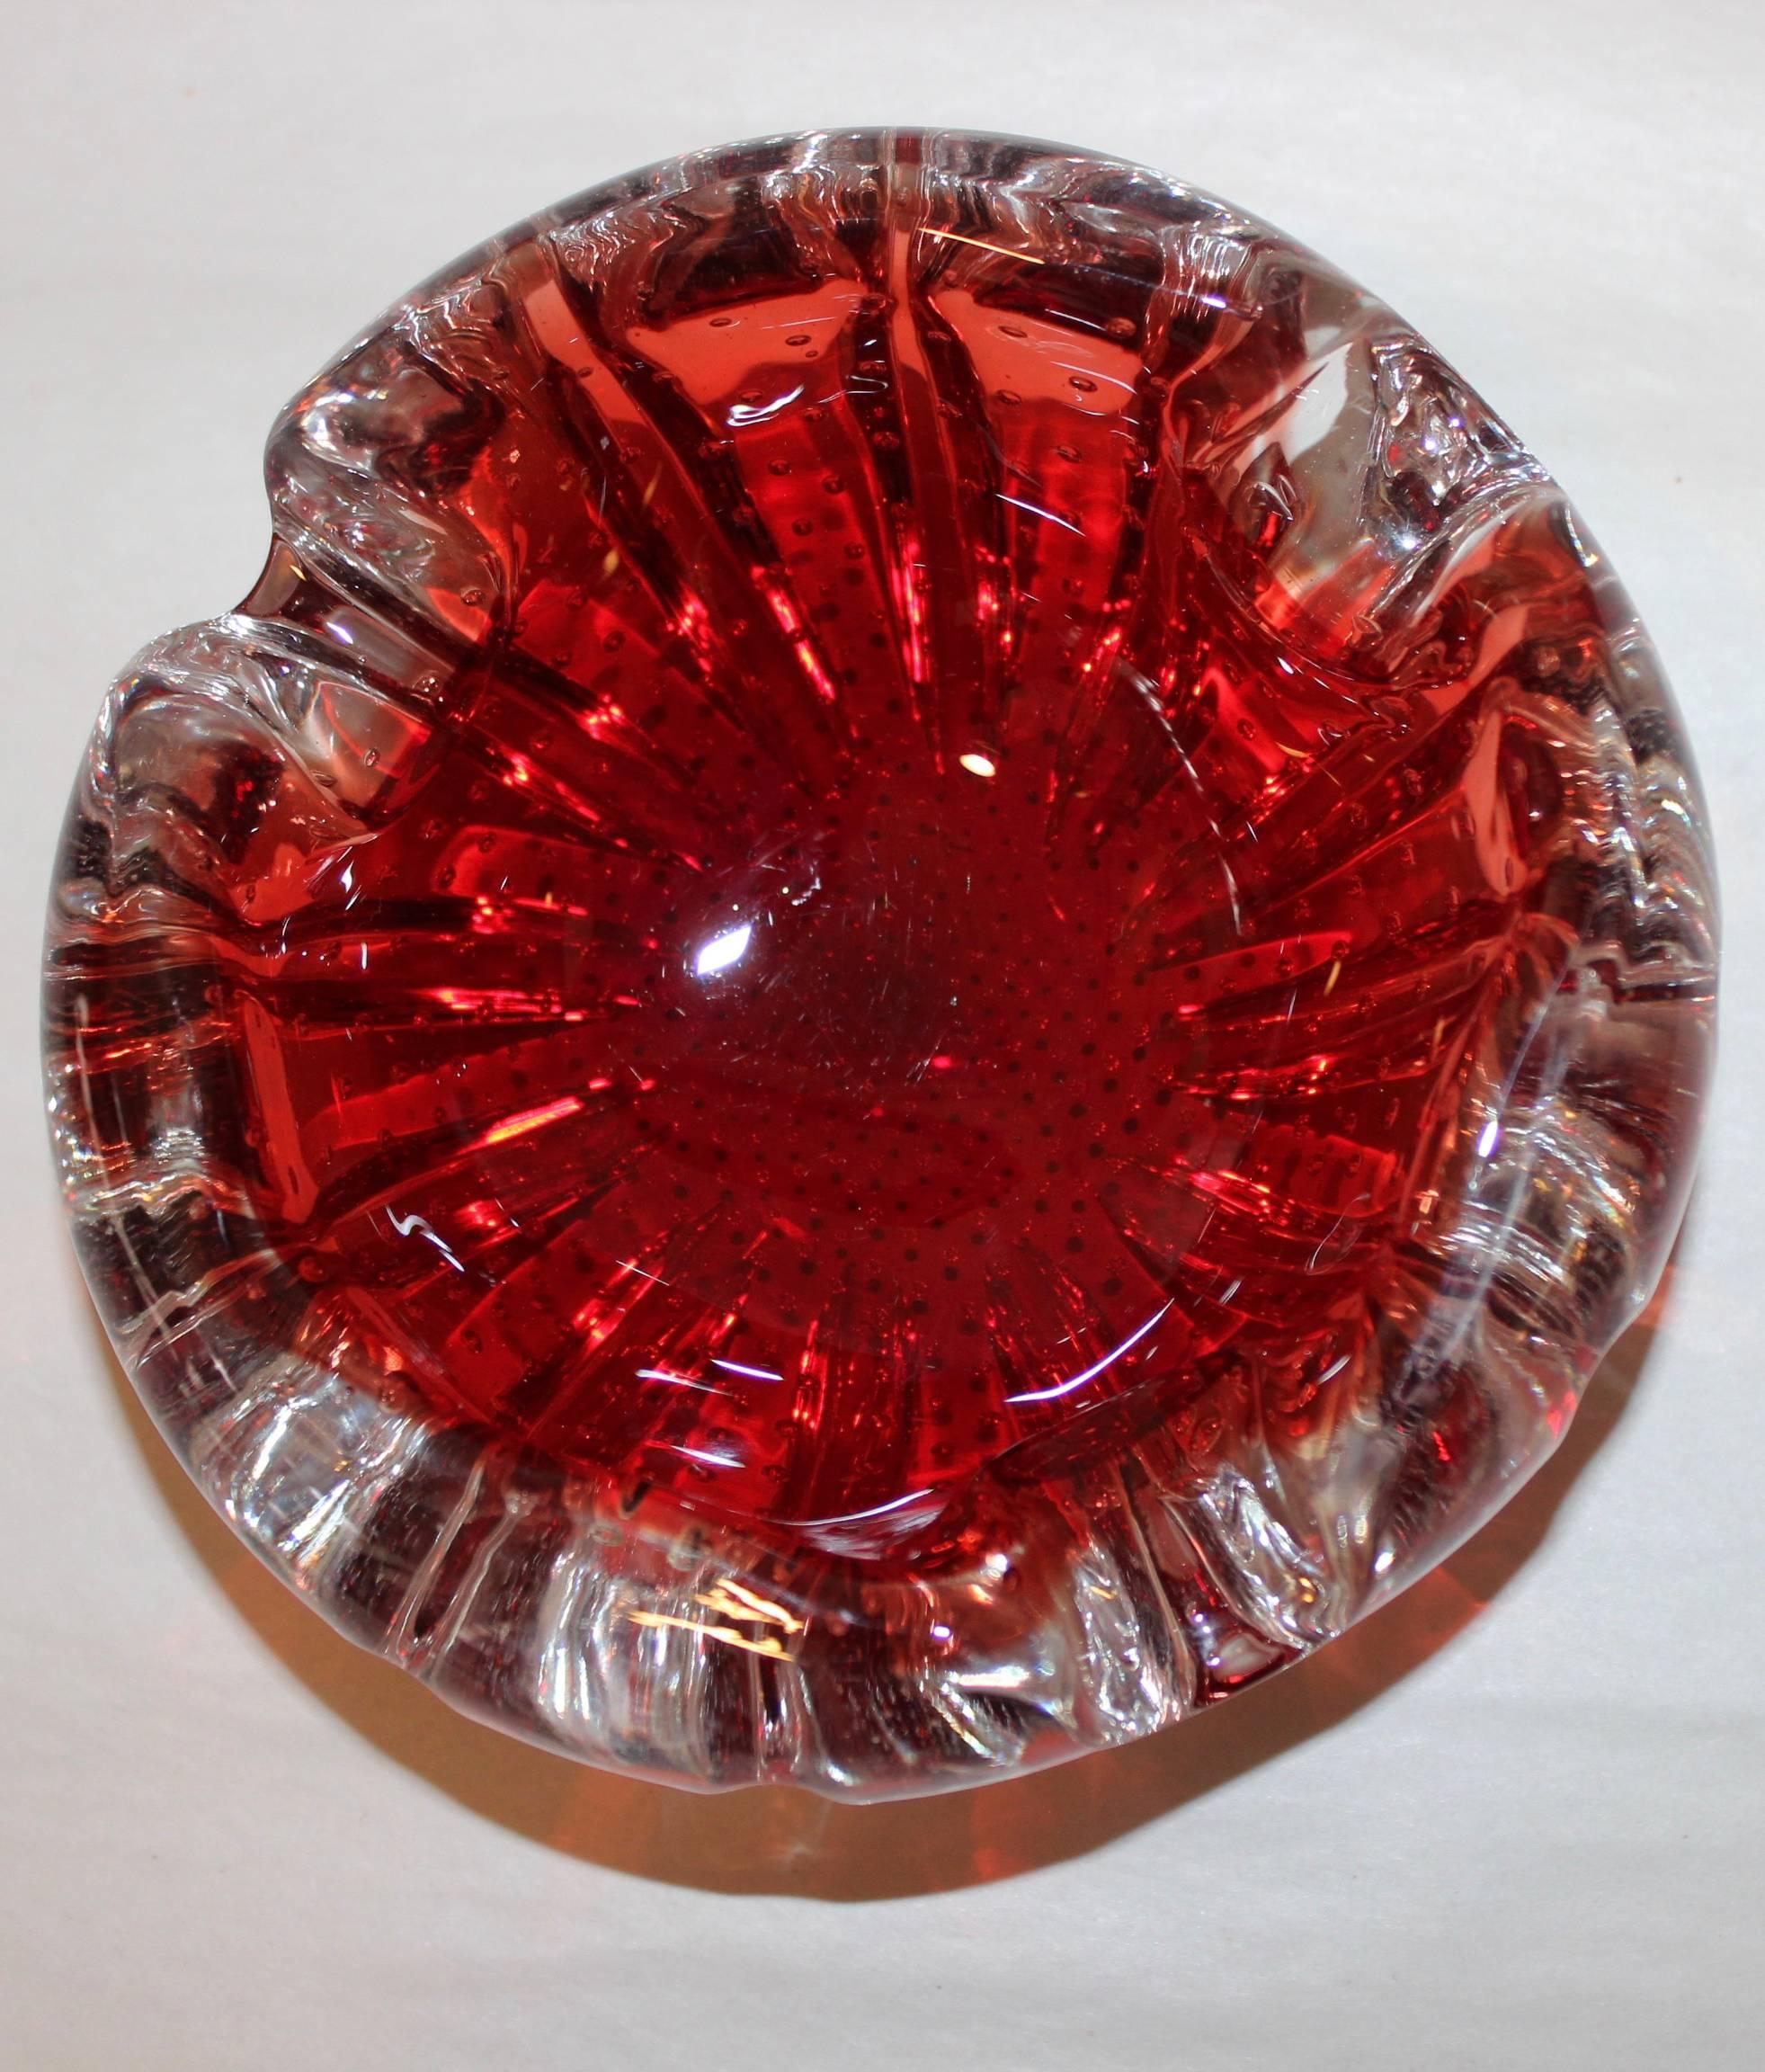 Murano Glass Decorative Bowls Collection In Good Condition For Sale In New York, NY